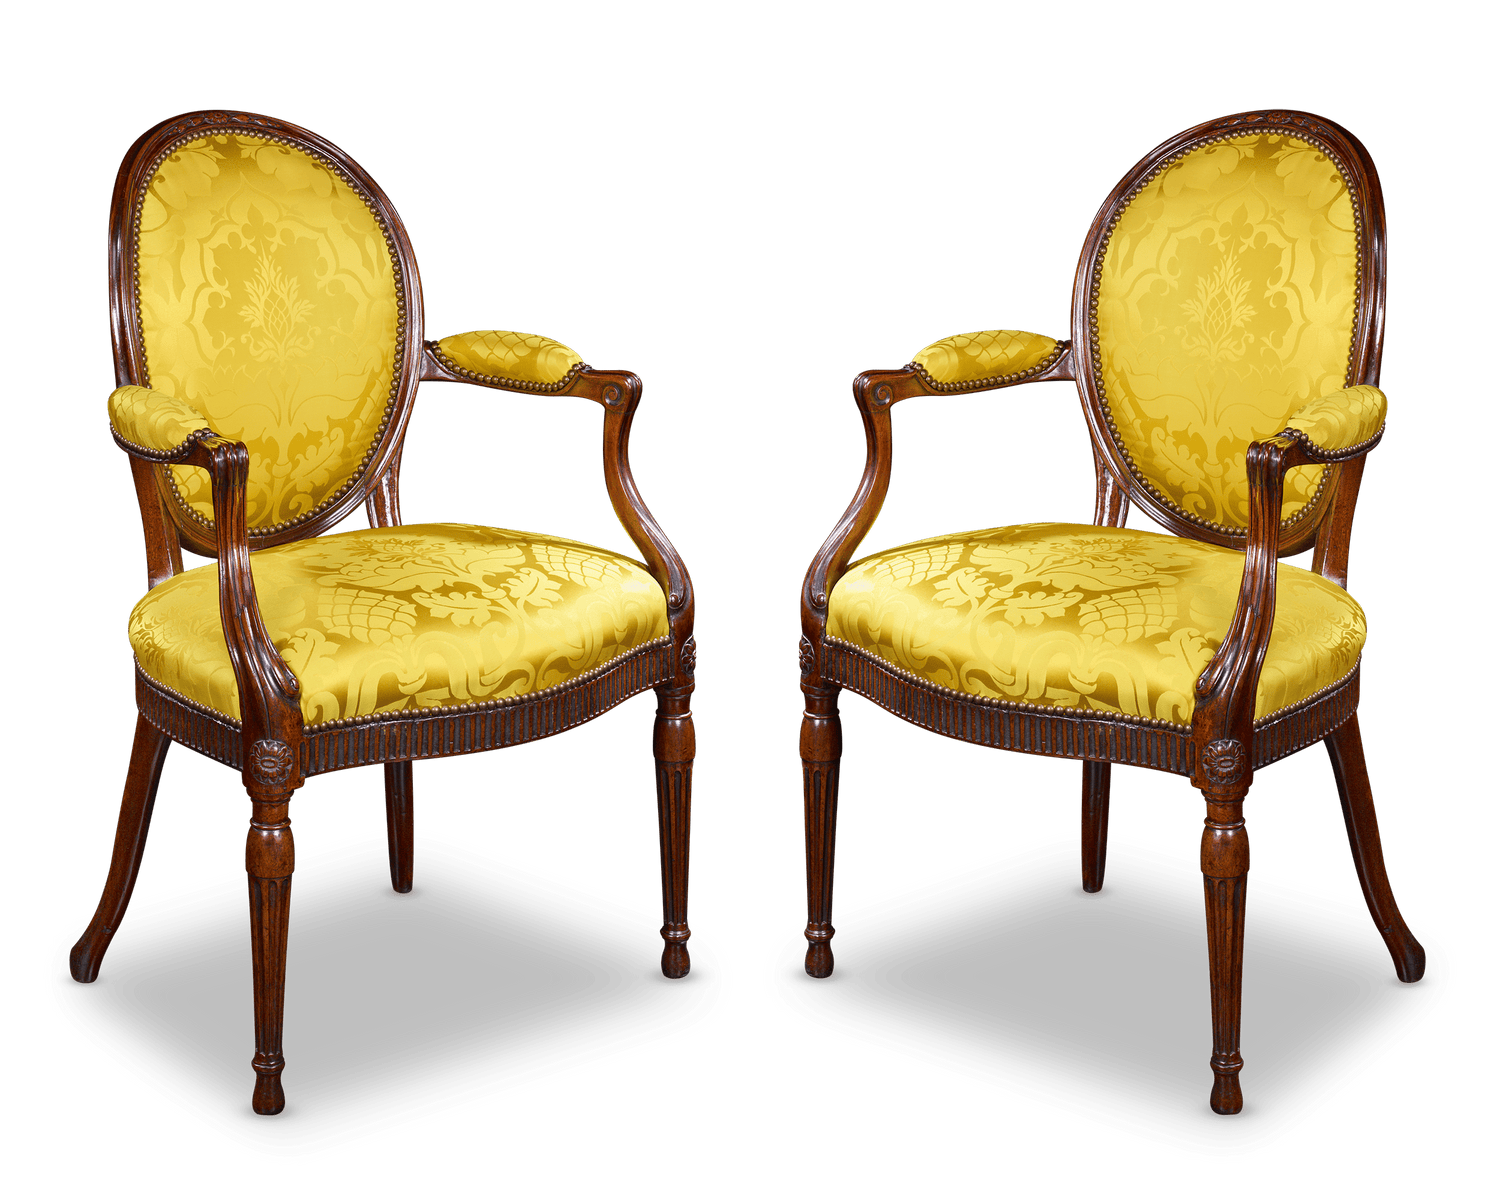 Pair of Mahogany Armchairs By Thomas Chippendale